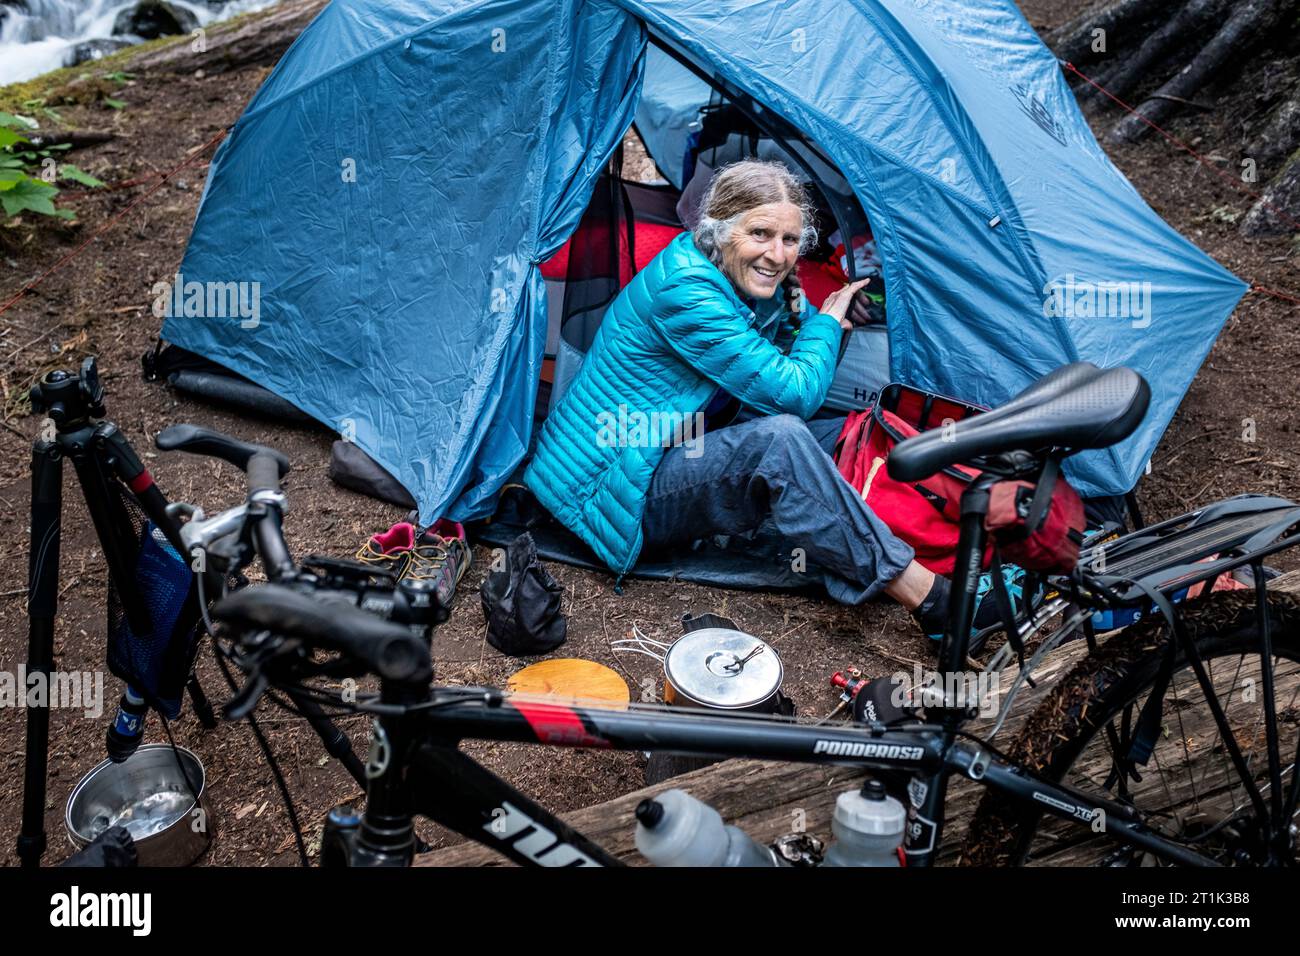 WA24560-00....WASHINGTON - Vicky spring found a nice campsite while bikepacking touring the From The Top around the Hood Canal. MR# S1. Stock Photo